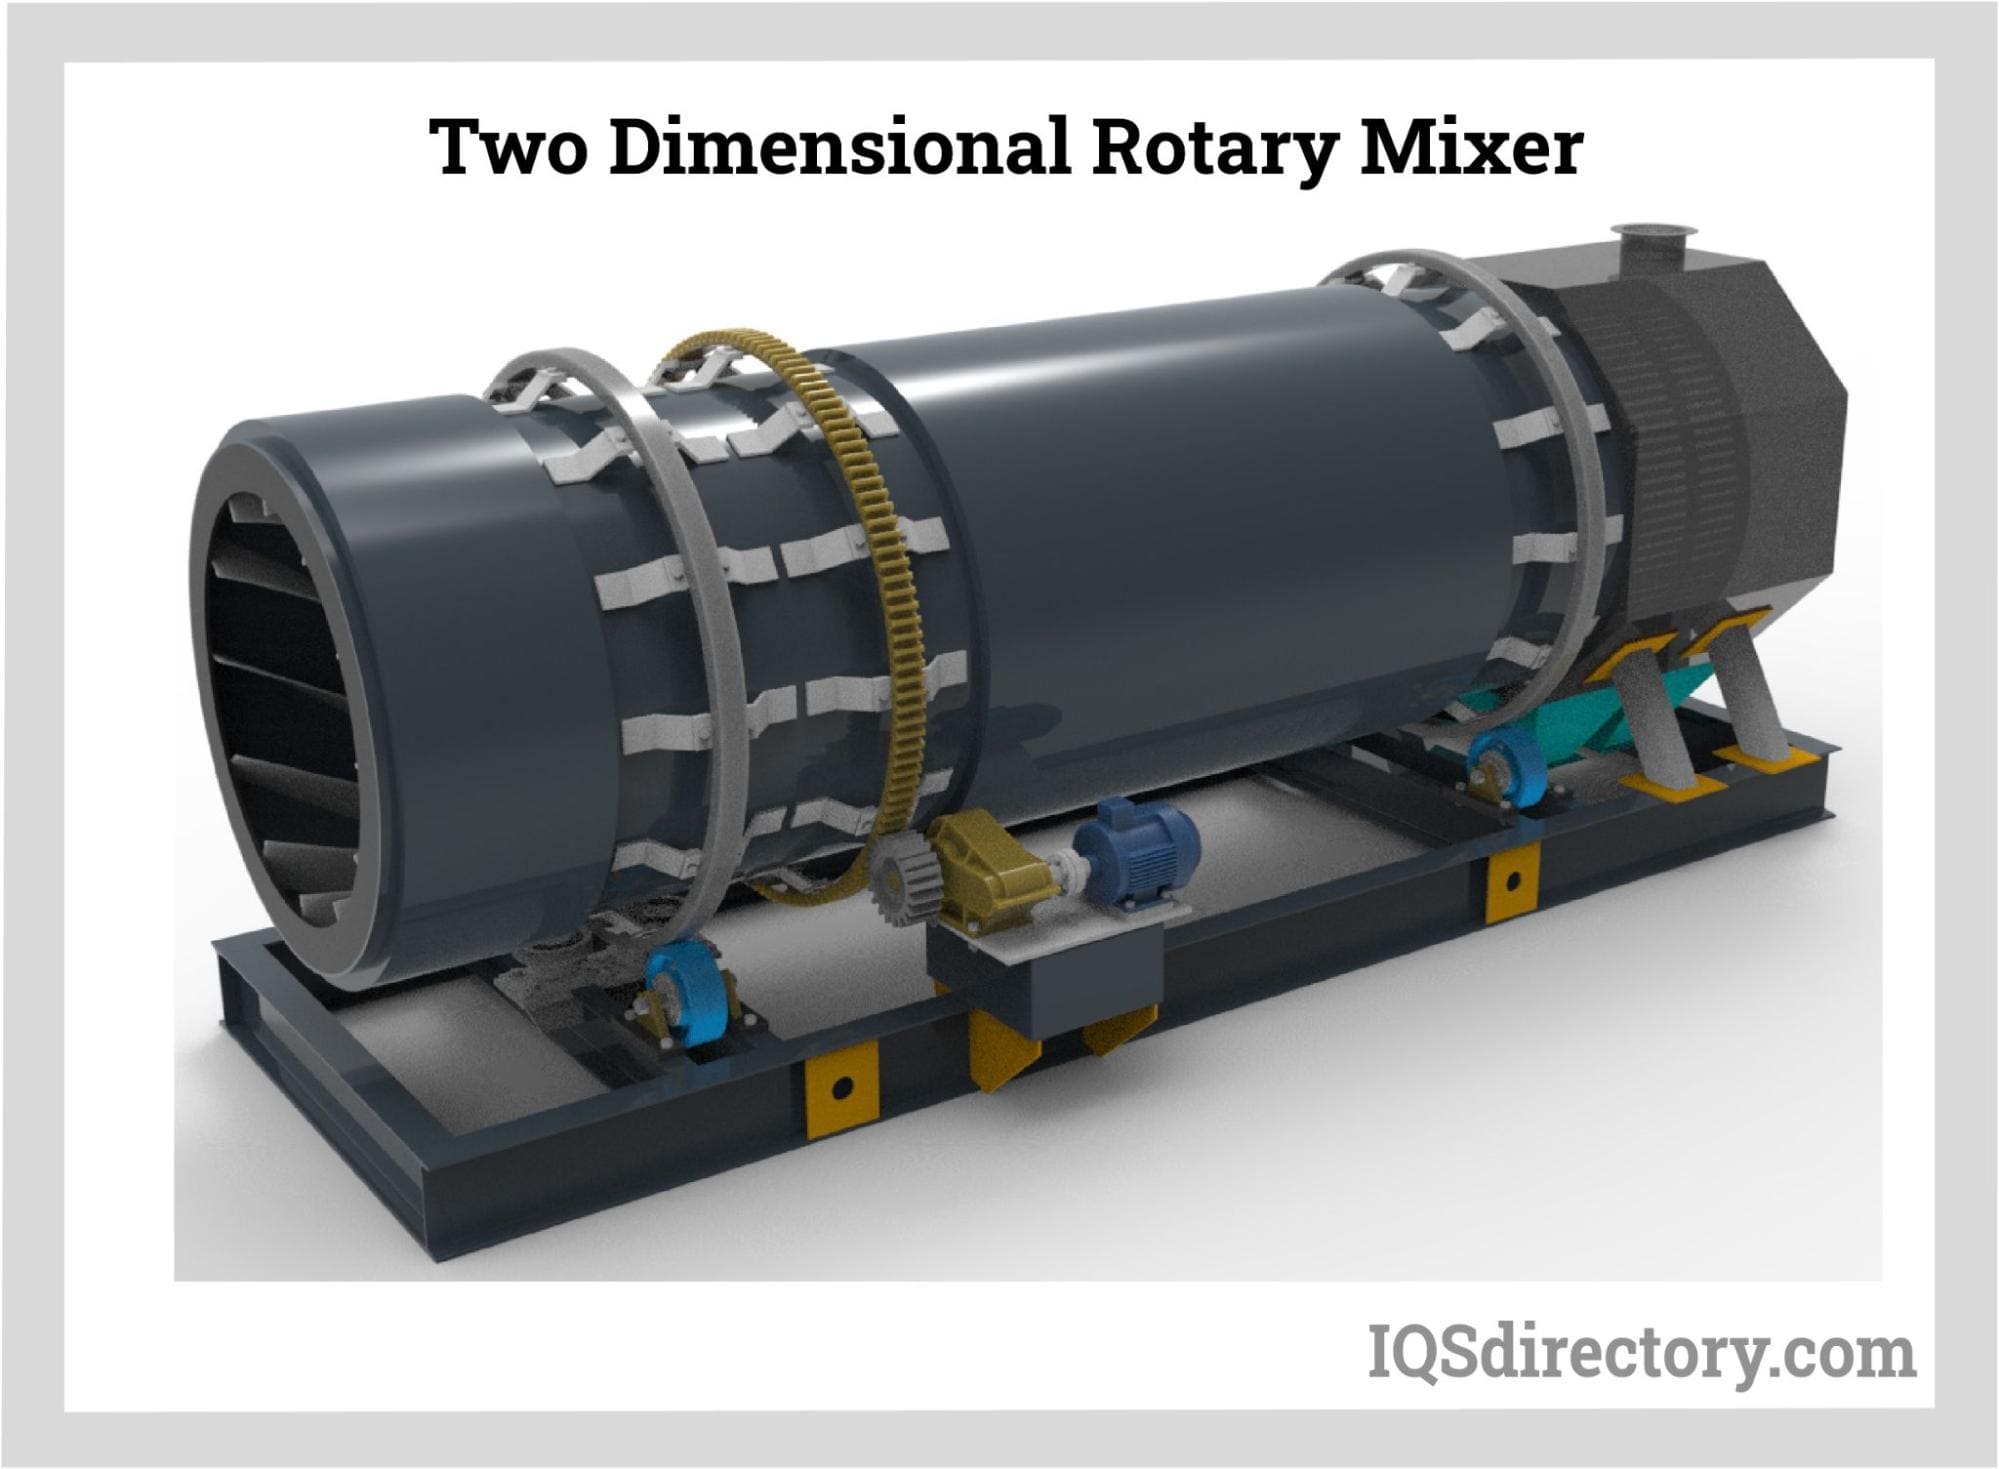 Two Dimensional Rotary Mixer